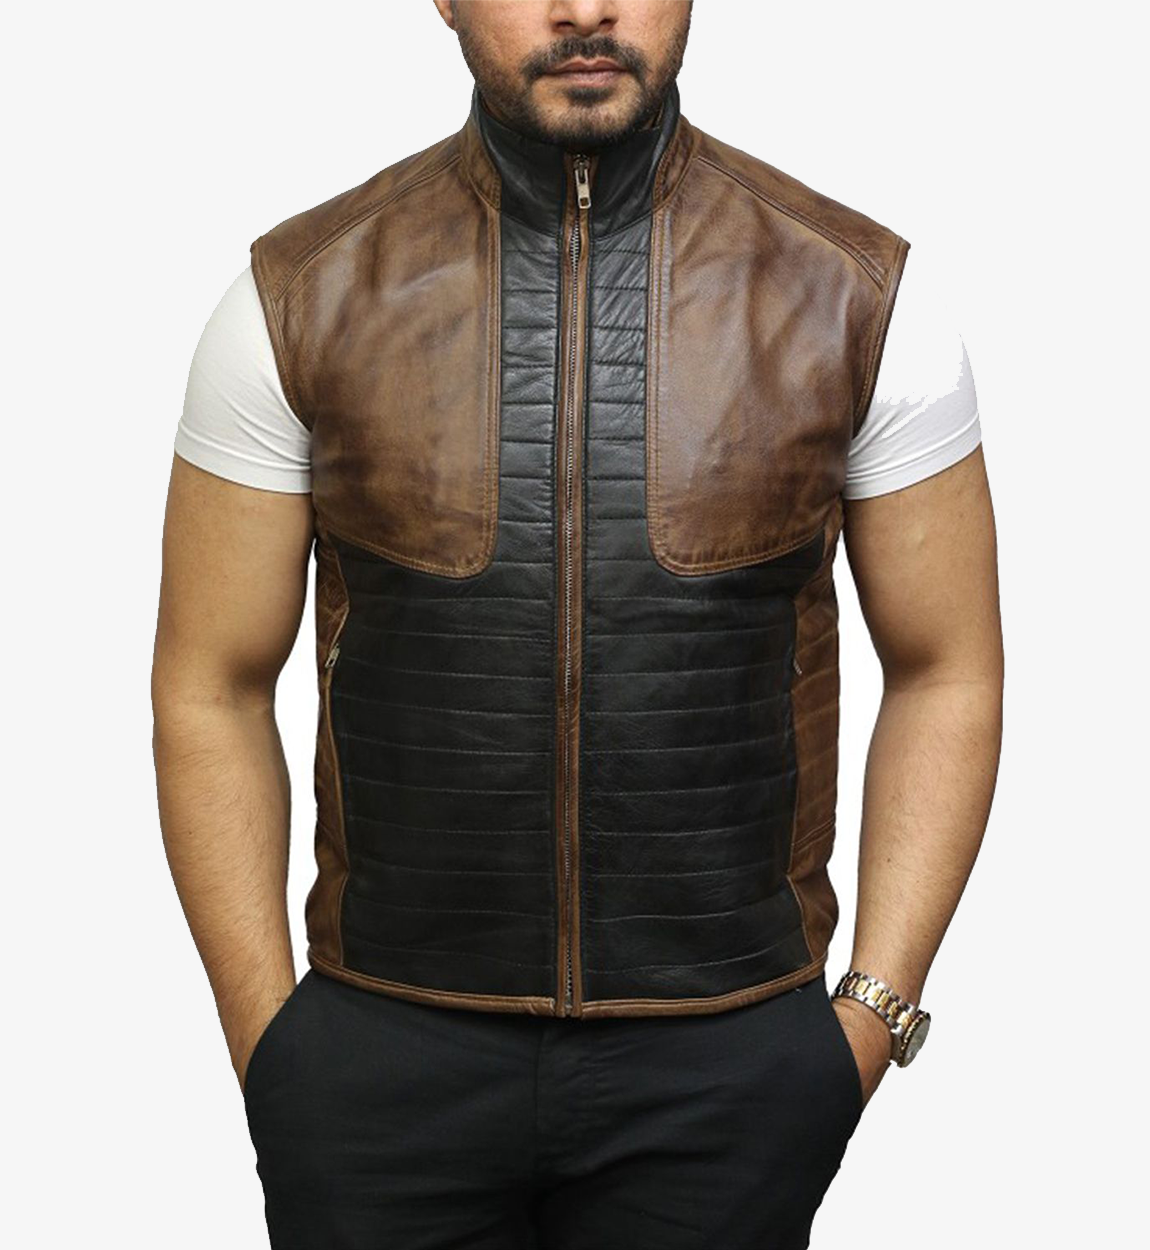 Men's Body Warmer Black and Brown Real Leather Vest